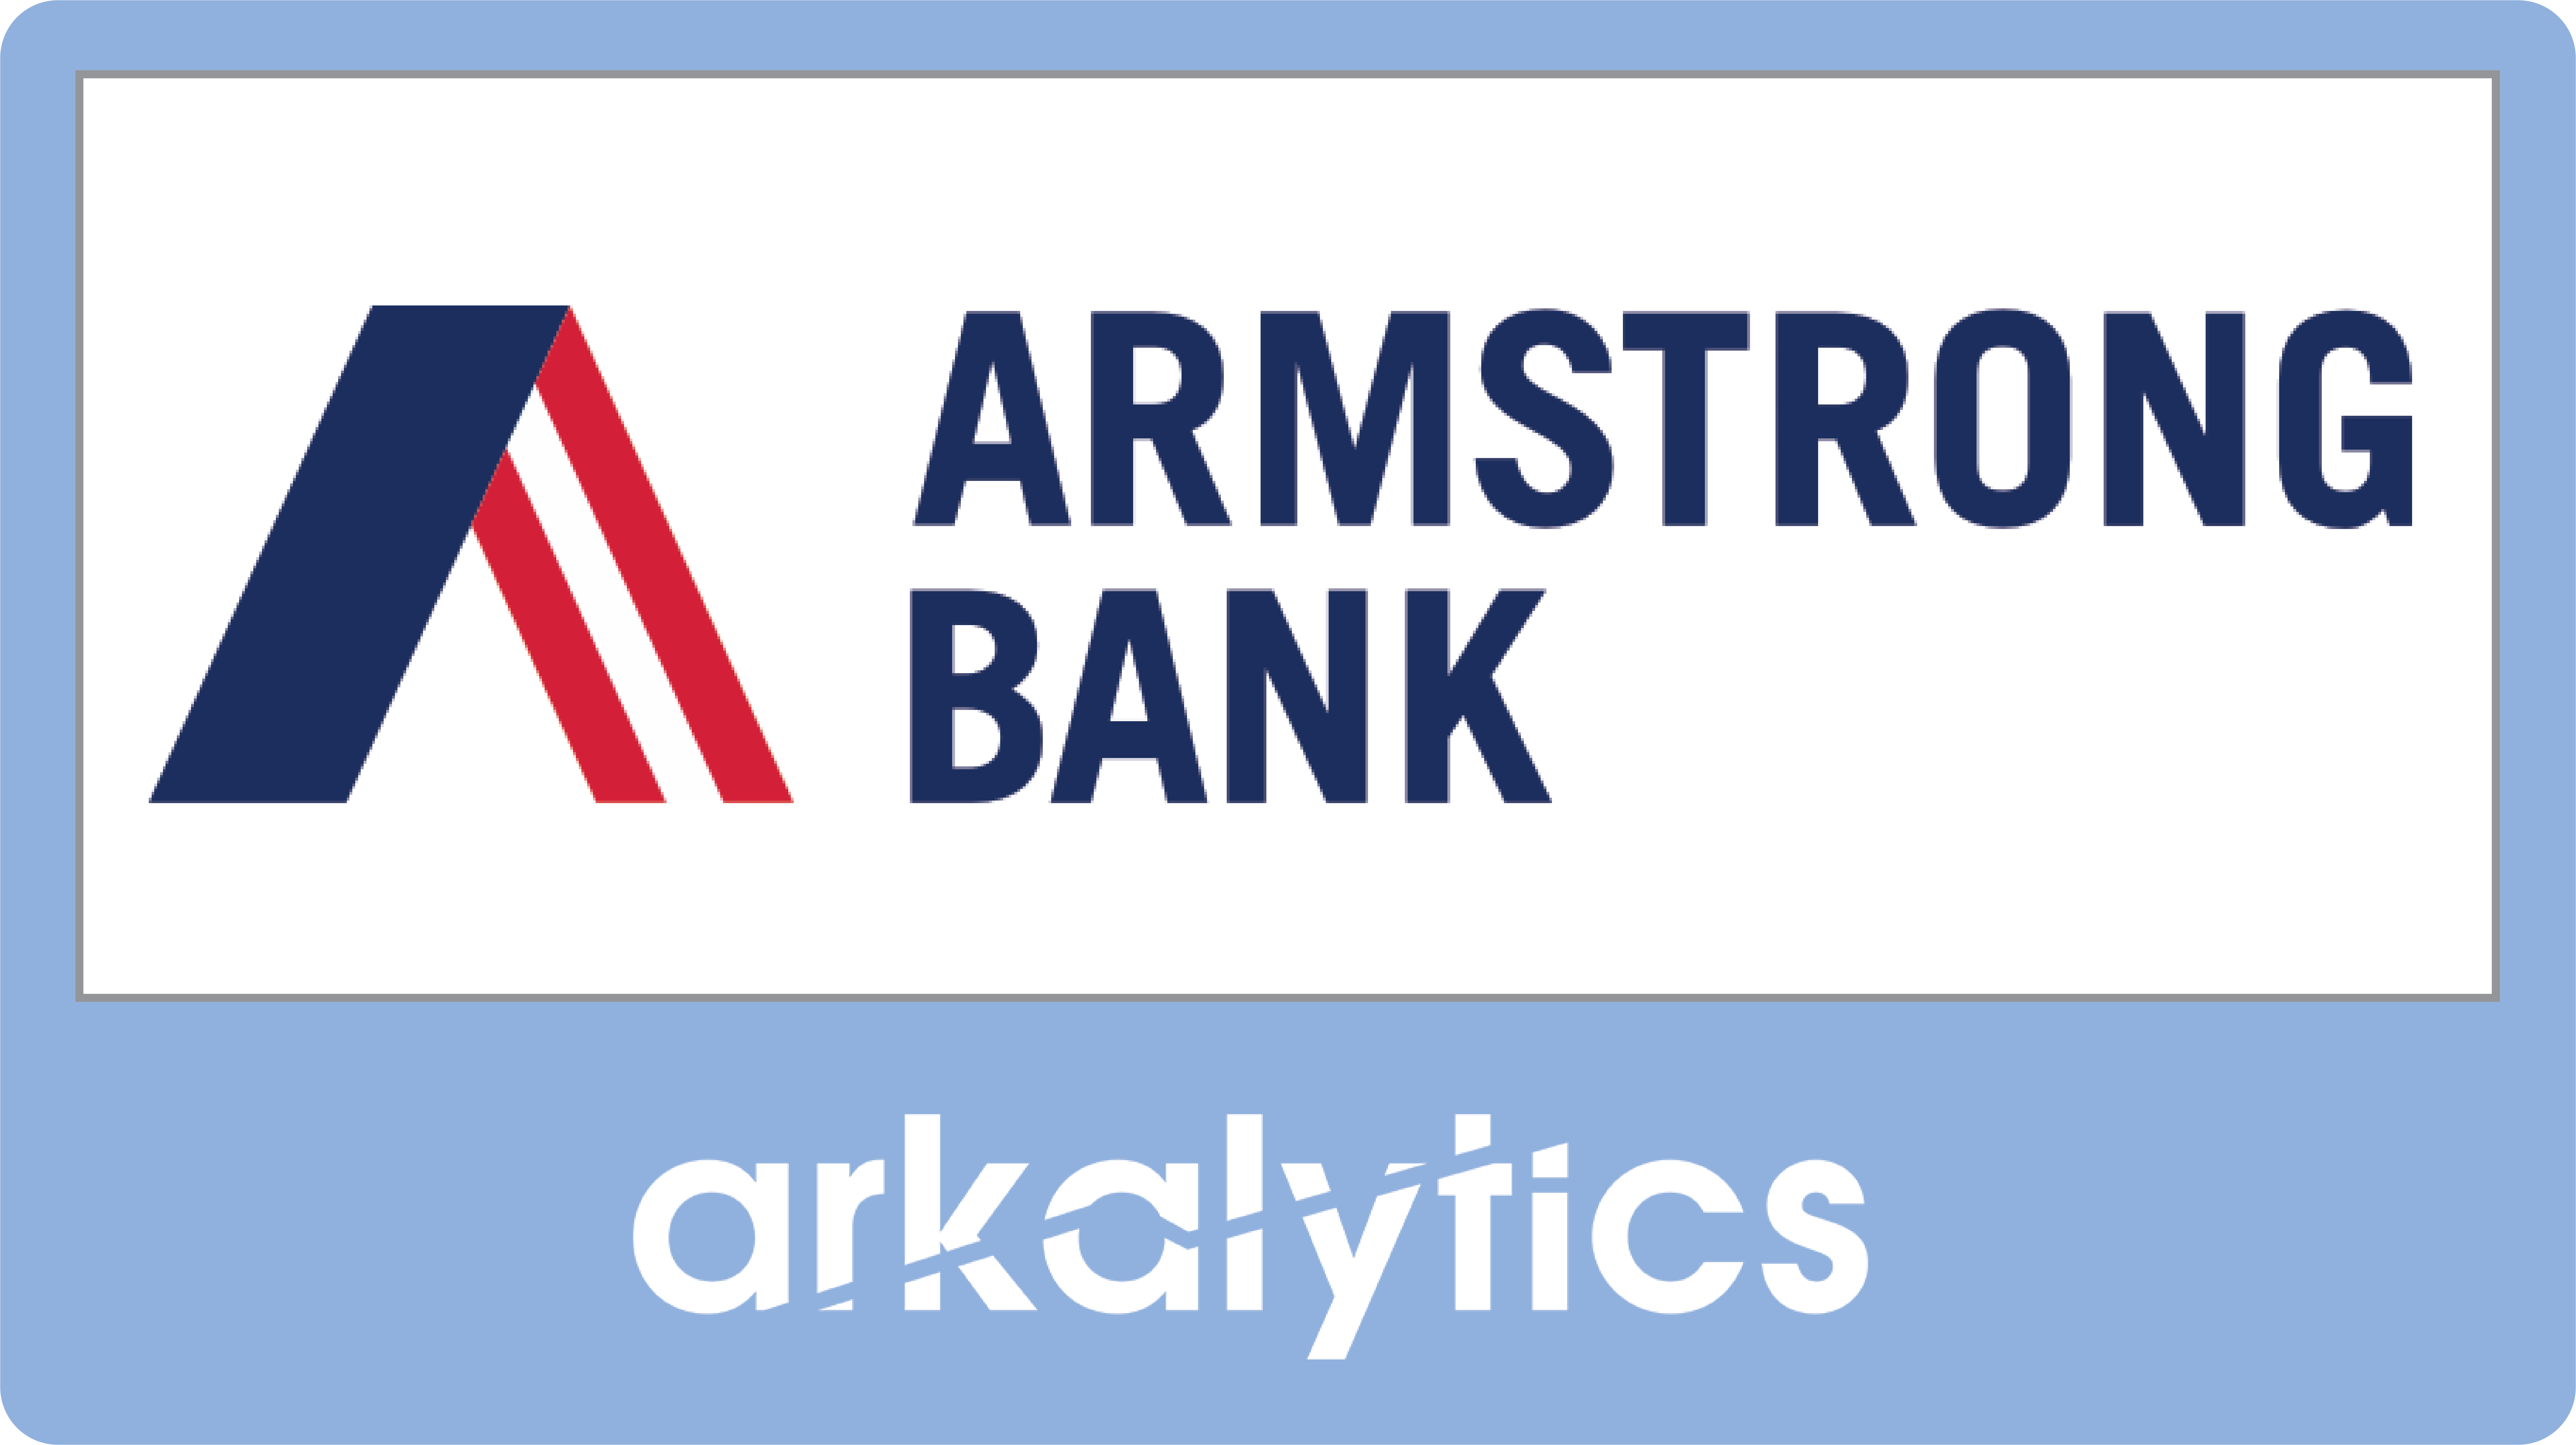 Armstrong Bank press release